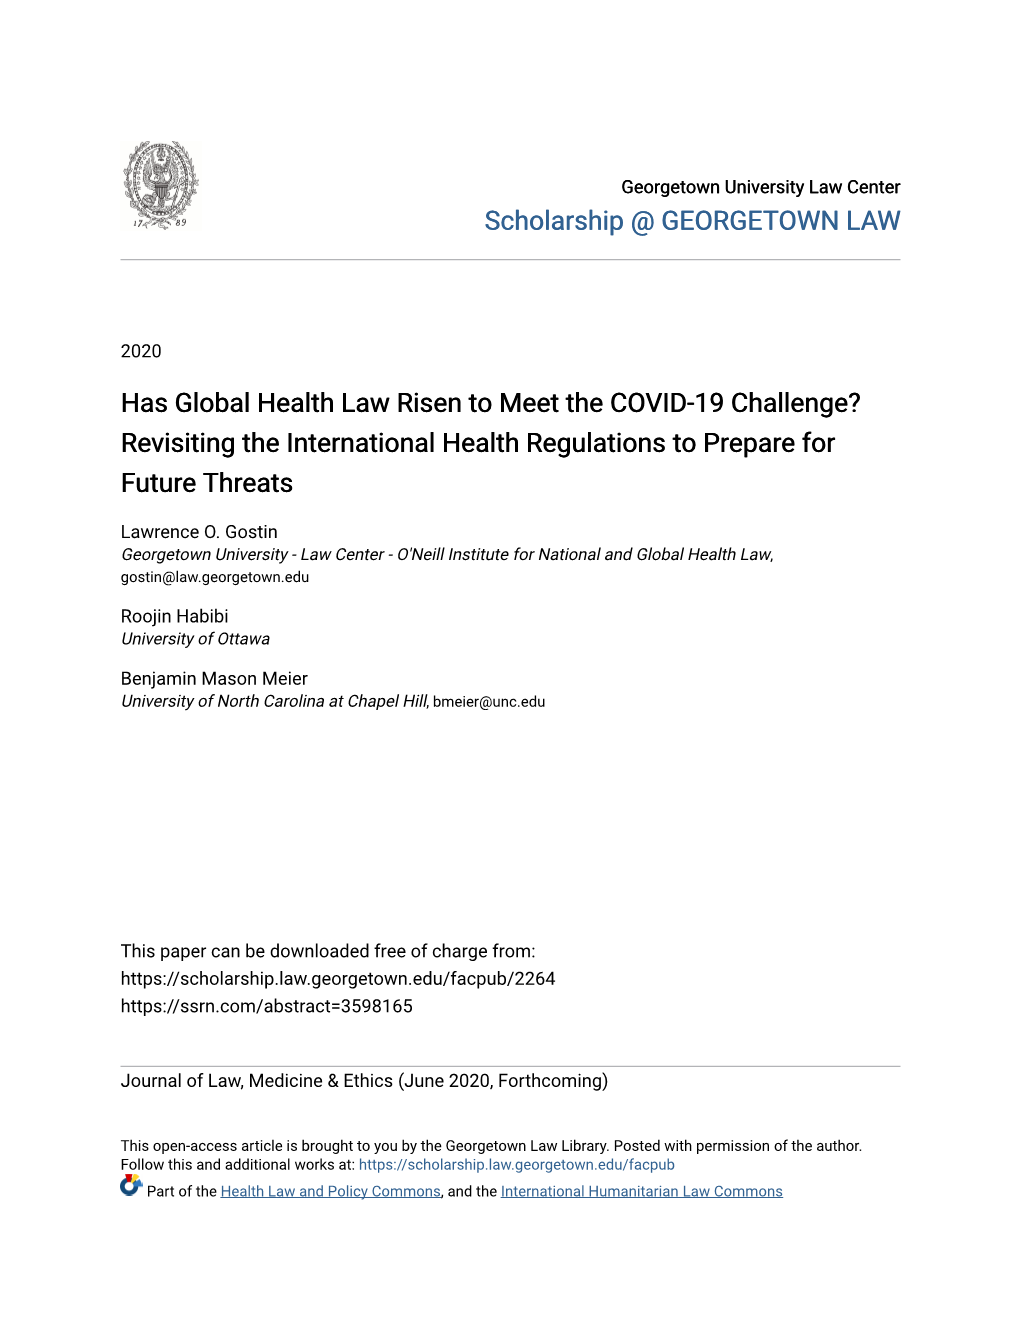 Has Global Health Law Risen to Meet the COVID-19 Challenge? Revisiting the International Health Regulations to Prepare for Future Threats